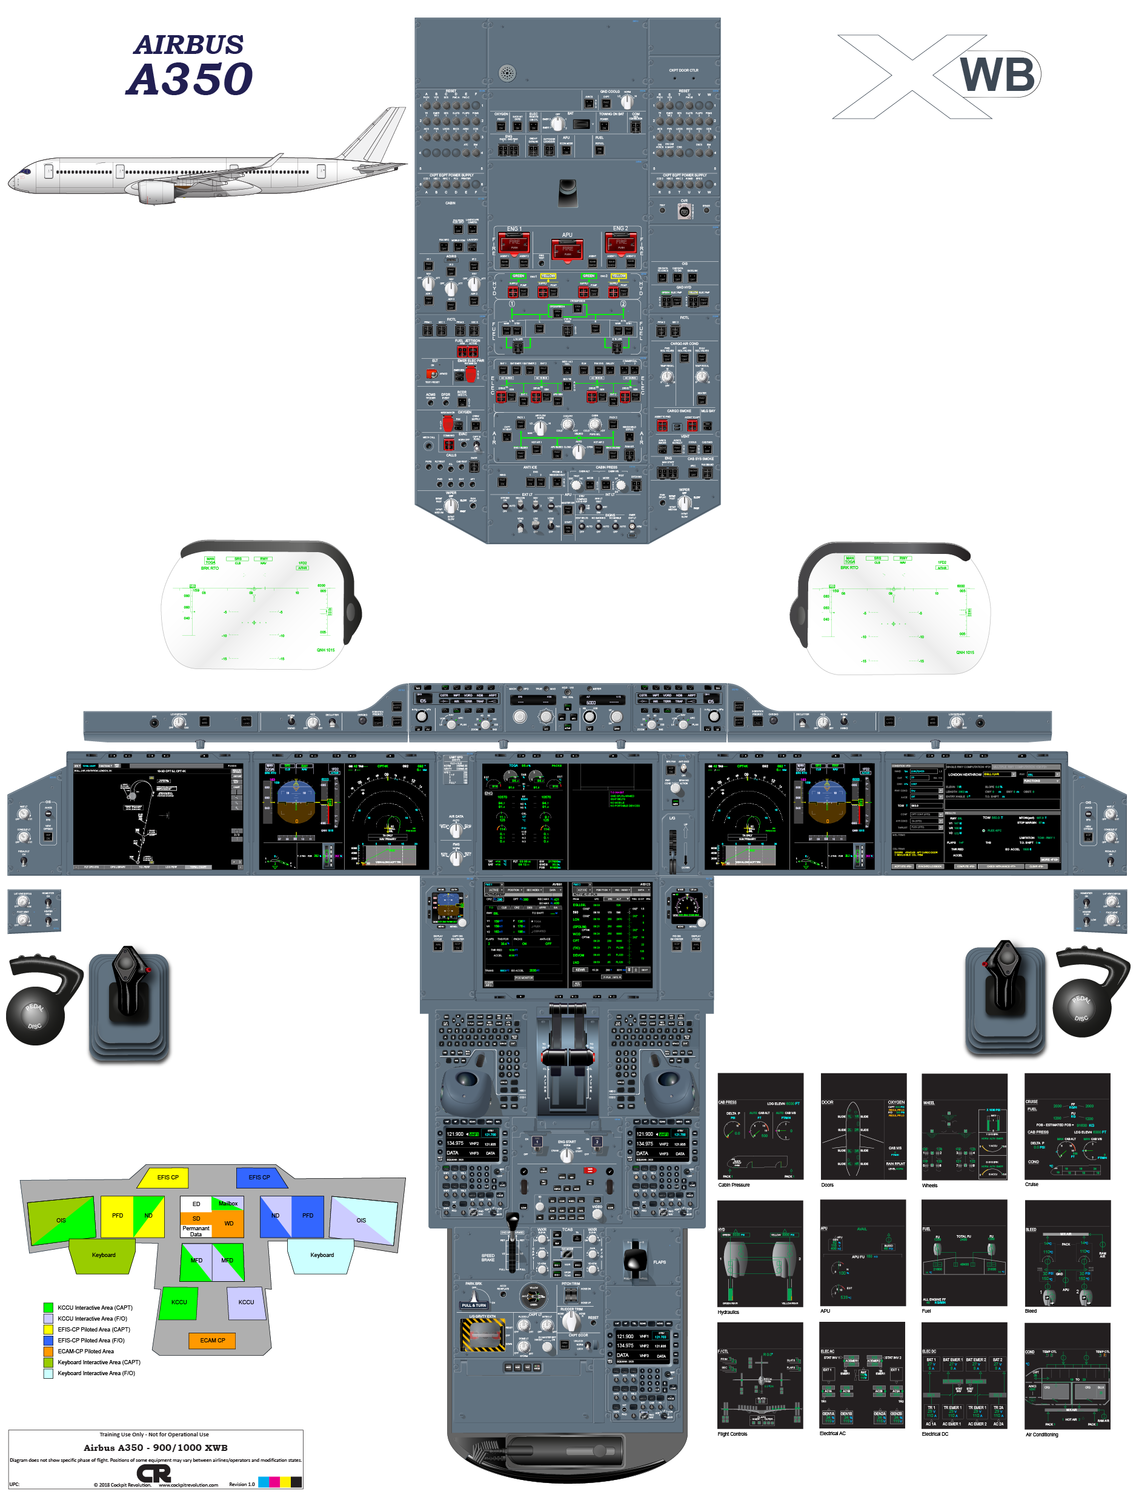 Airbus A350 Cockpit Poster - Printed